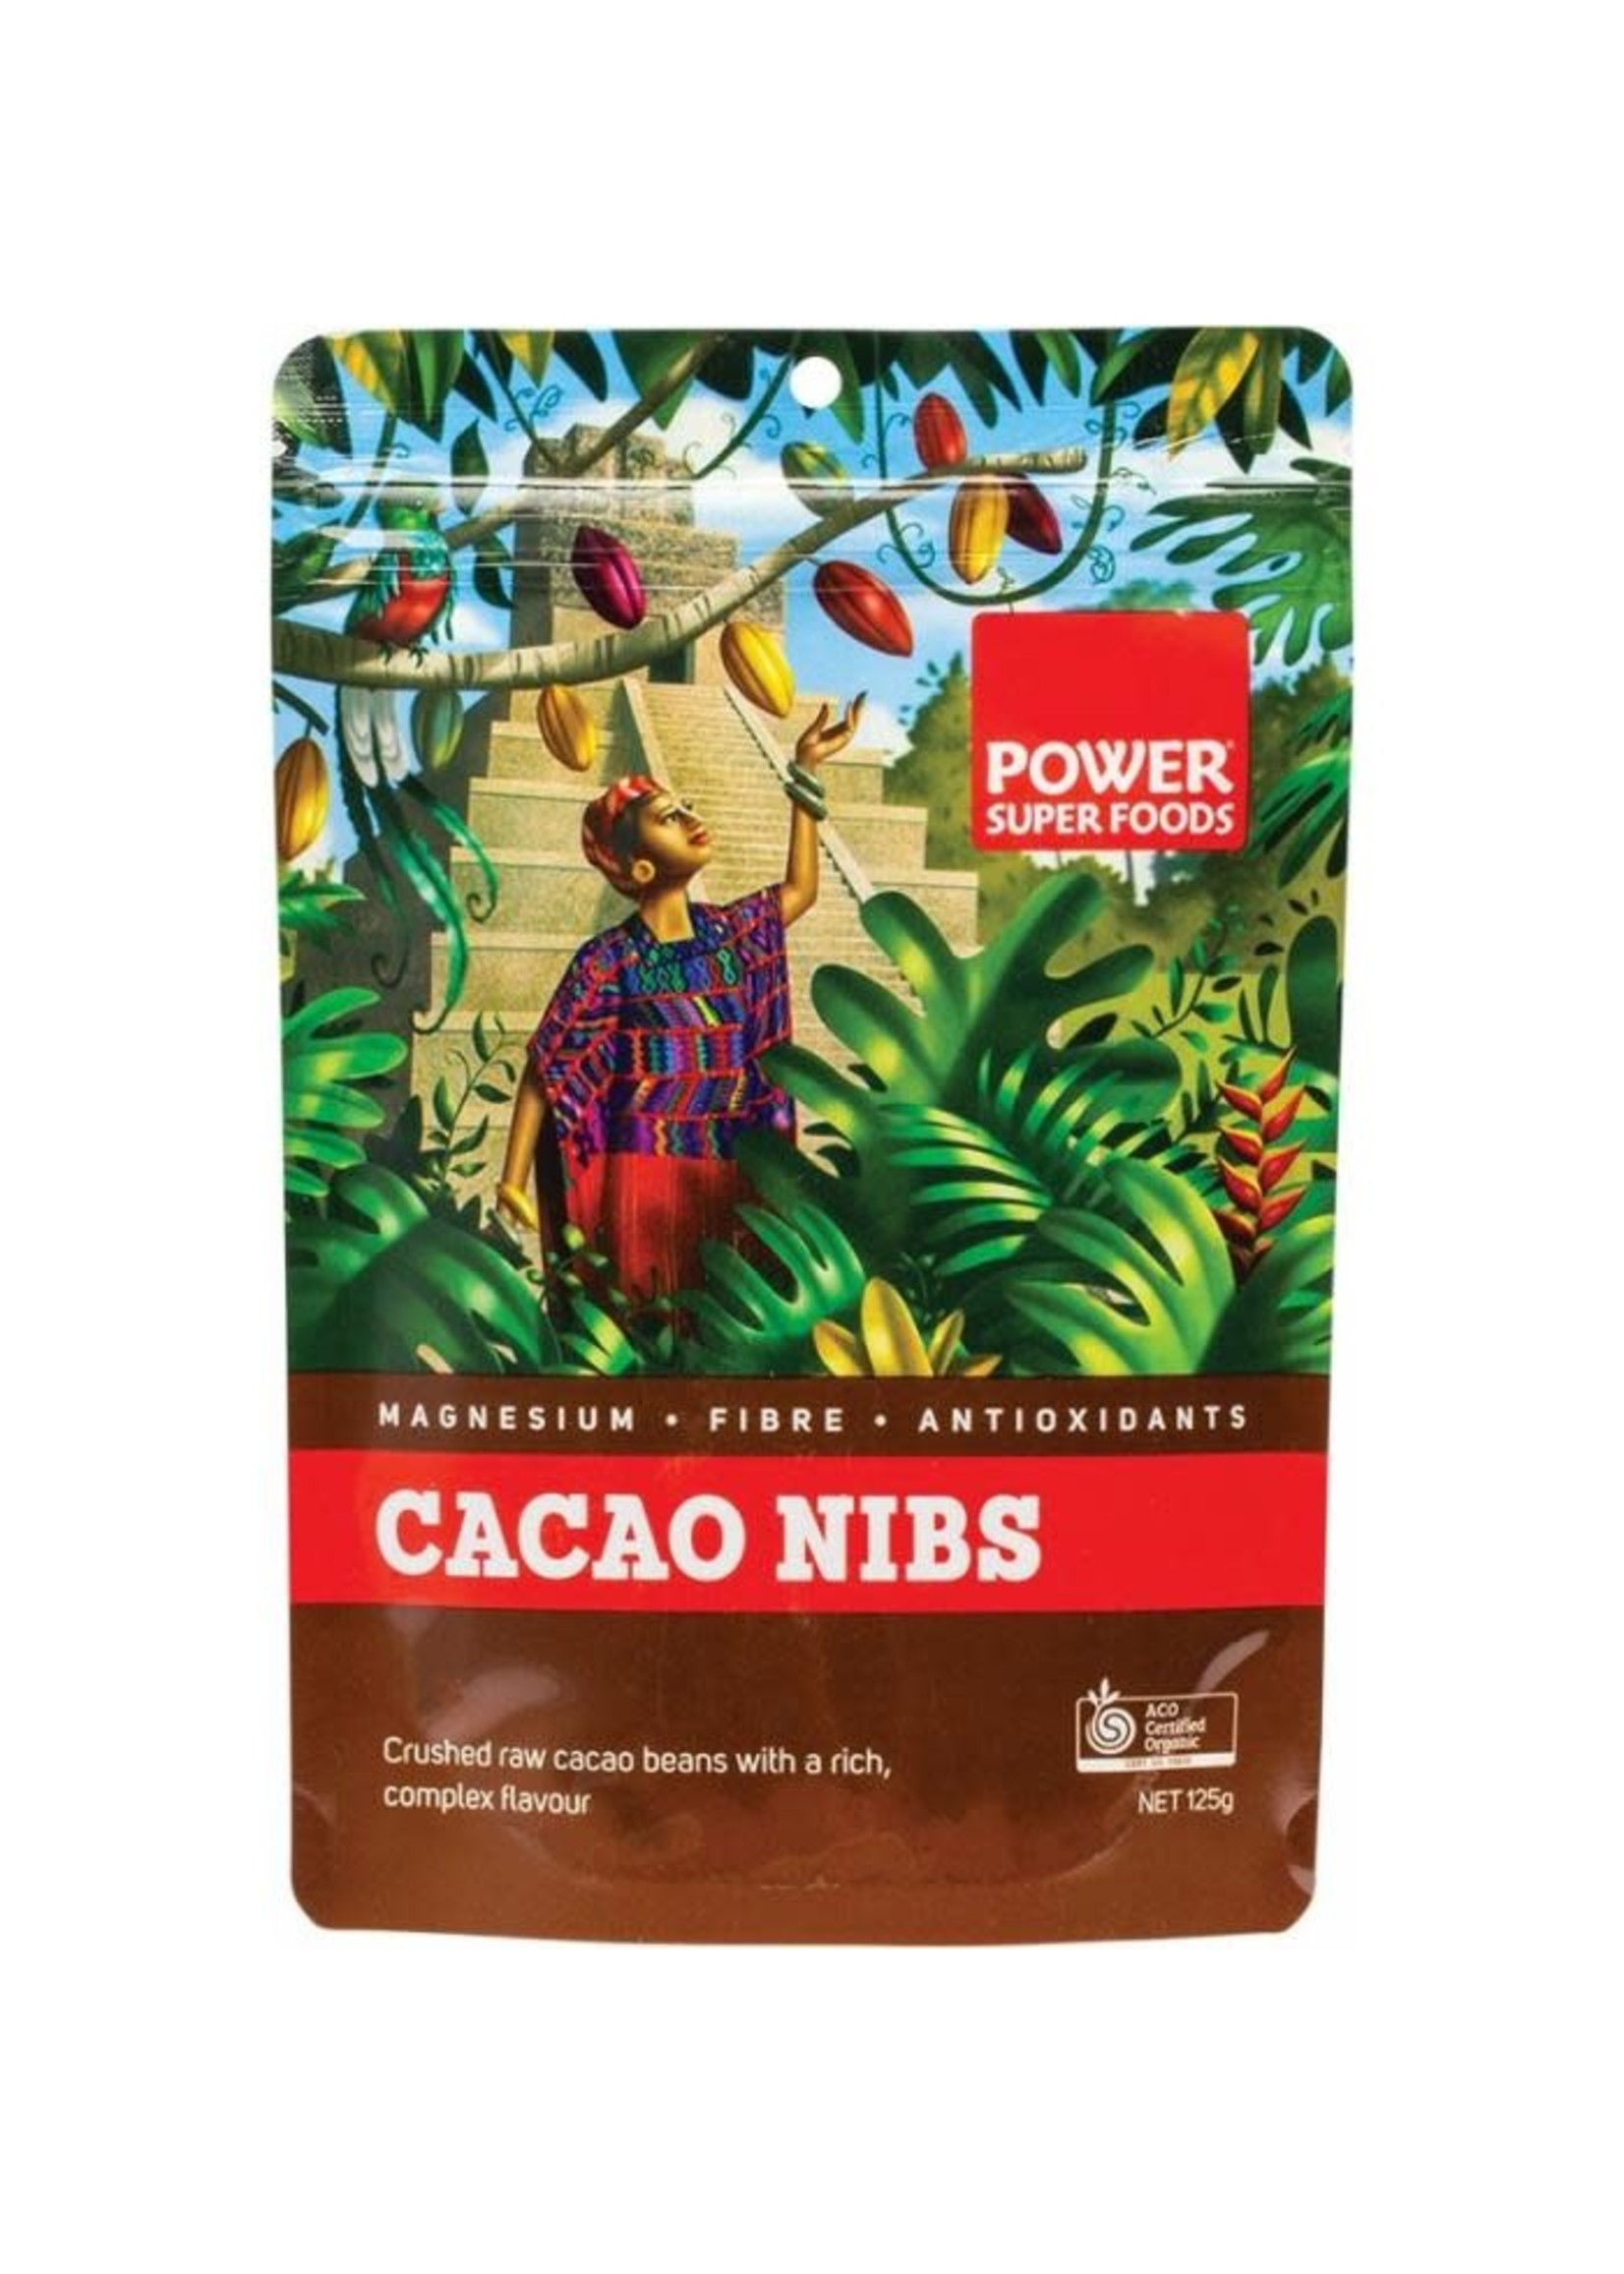 POWER SUPER FOODS Power Super Foods Cacao Nibs 125g